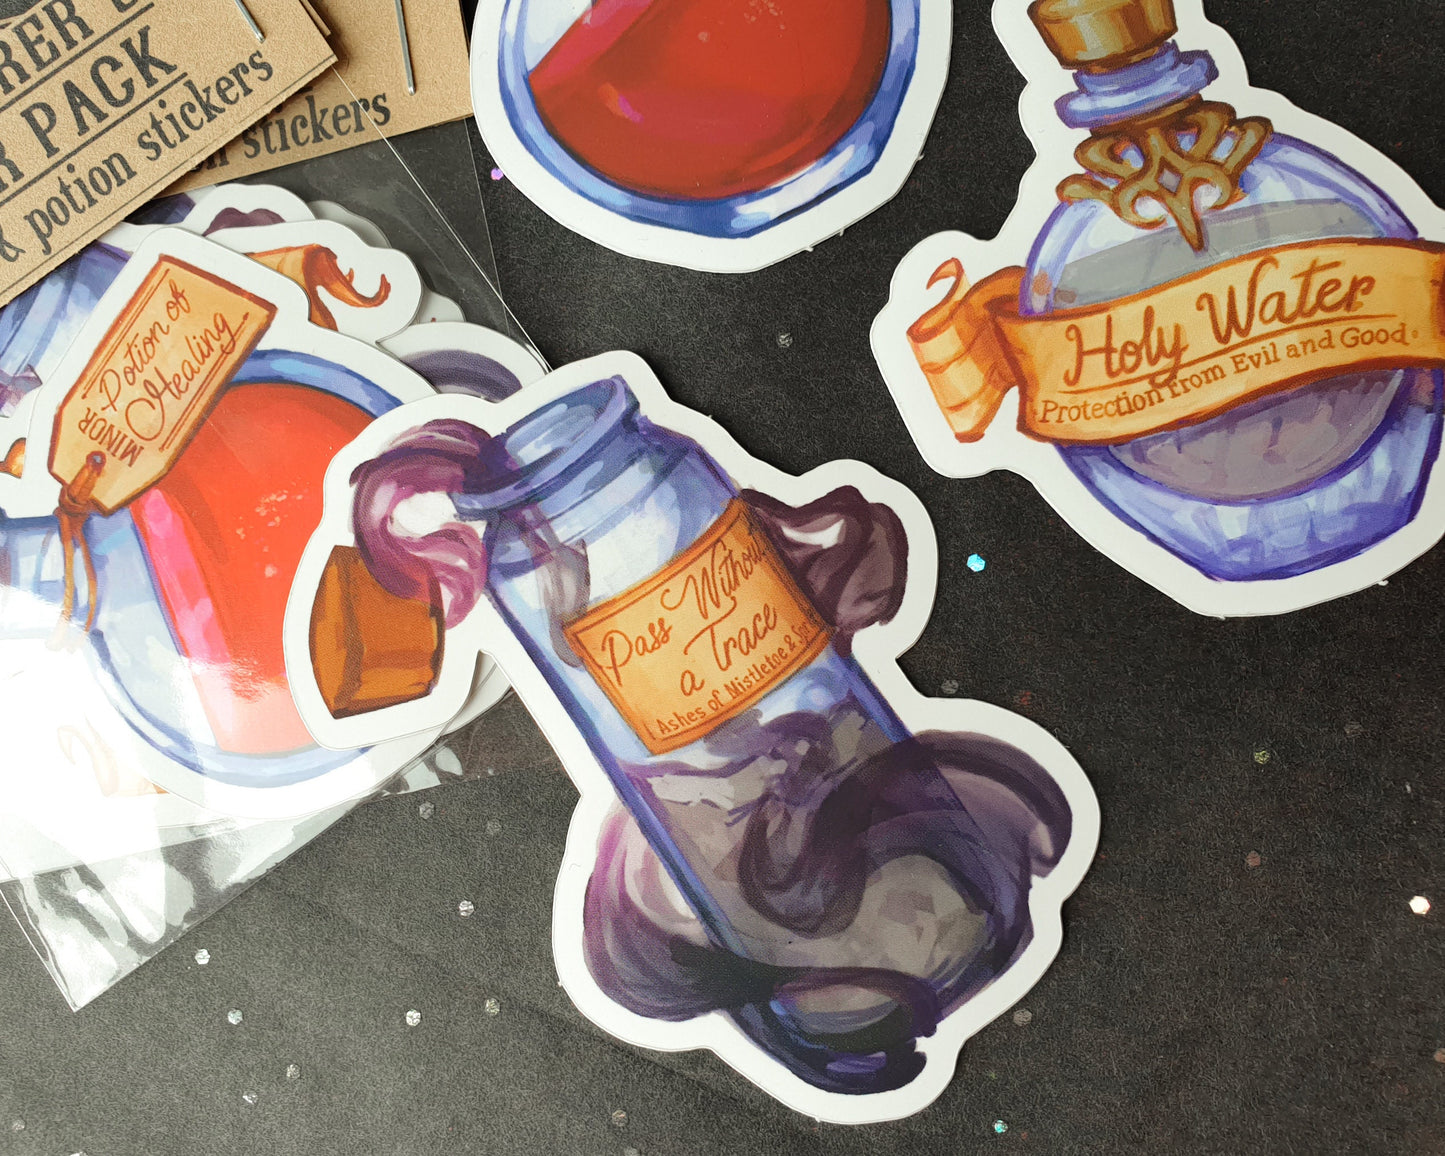 Spell Component and Potion Sticker Pack - 3 Stickers, Foil effect